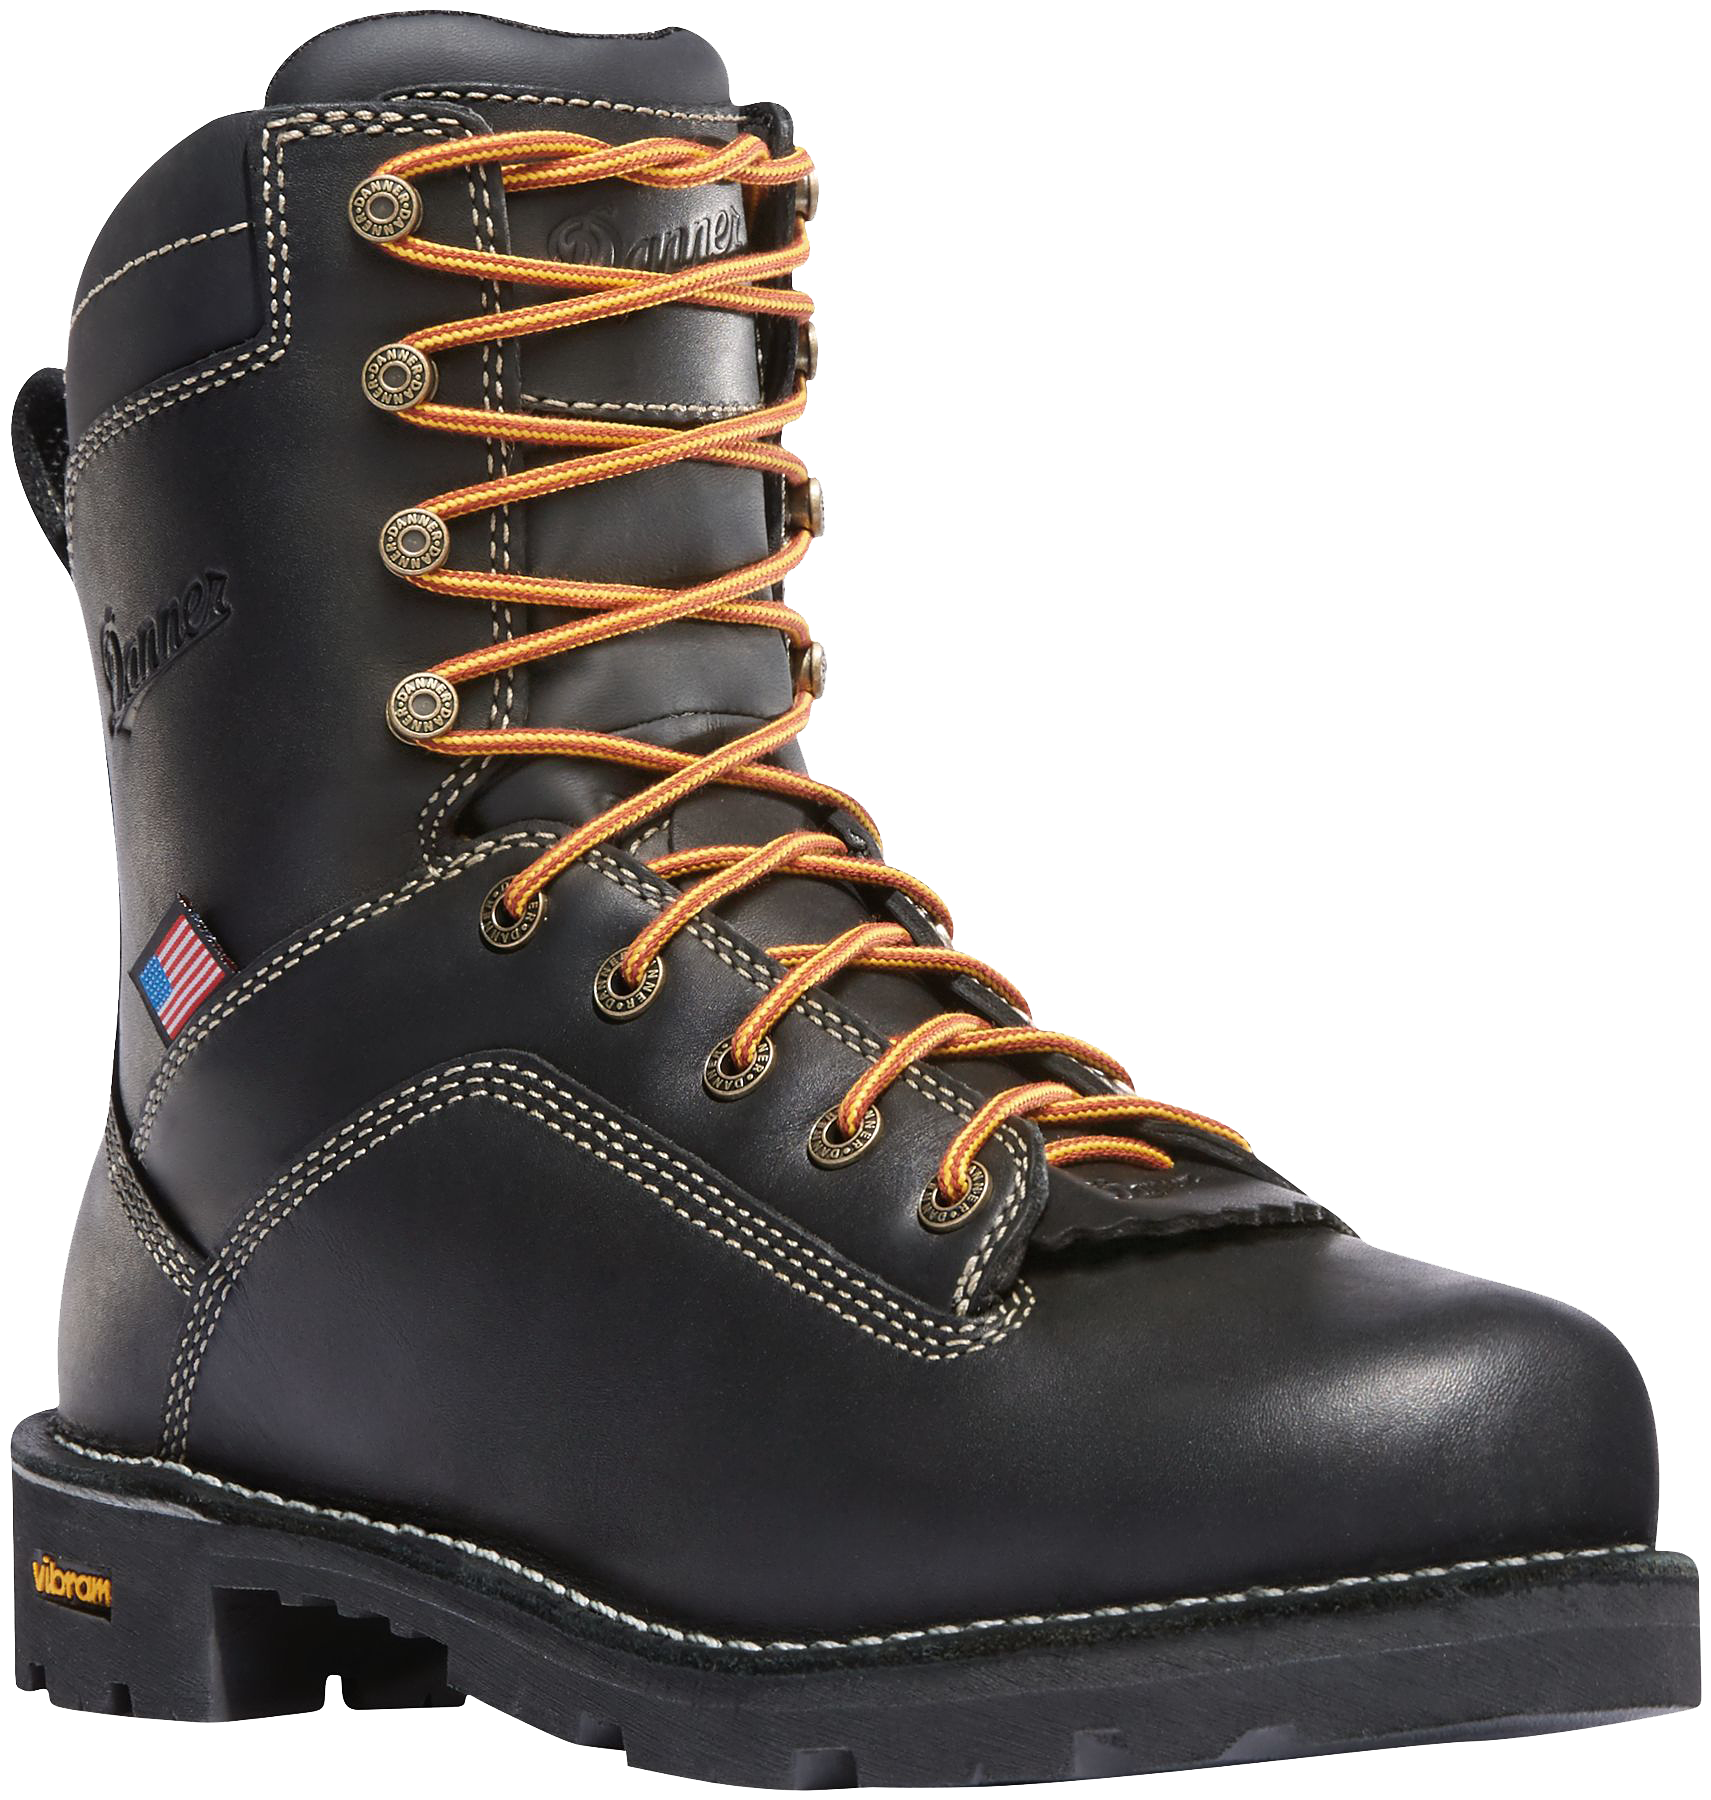 Danner Quarry USA Brown GORE-TEX Alloy Toe Work Boots for Men - Black - 8.5M